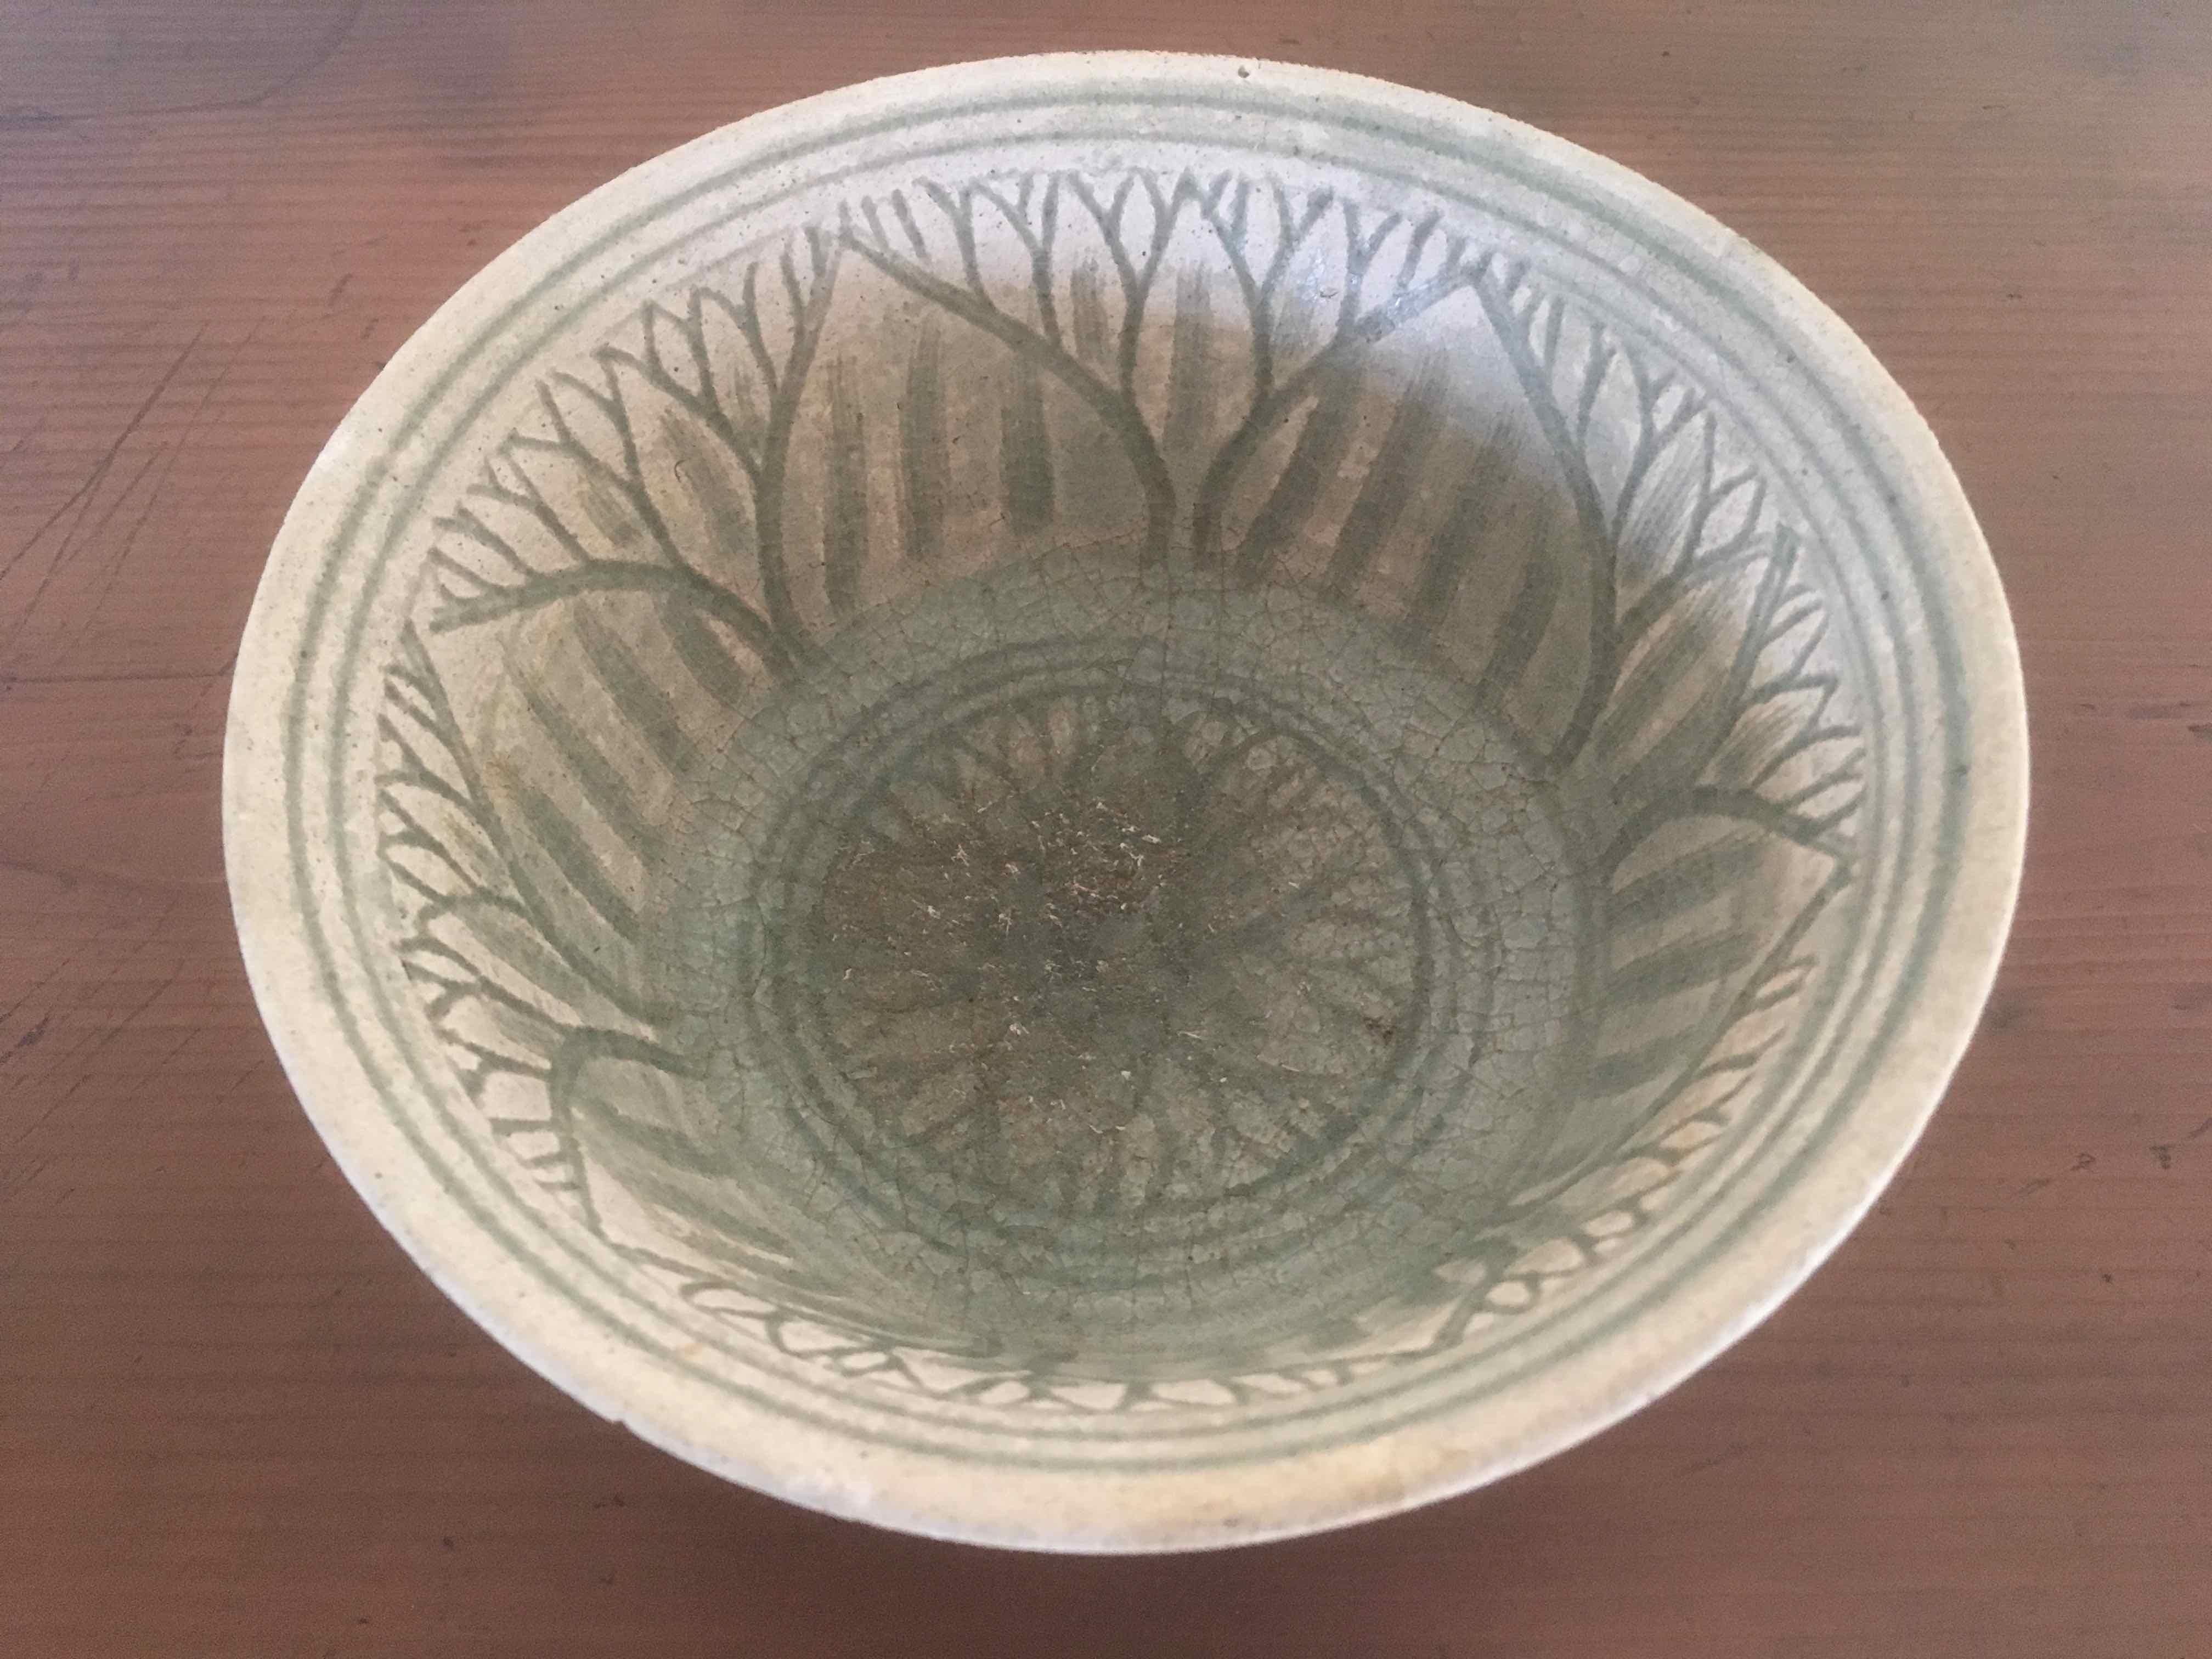 This is a Si Satchanalai celadon bowl that was recovered from a shipwreck in
Thailand. It dates from the 15th century and is 7